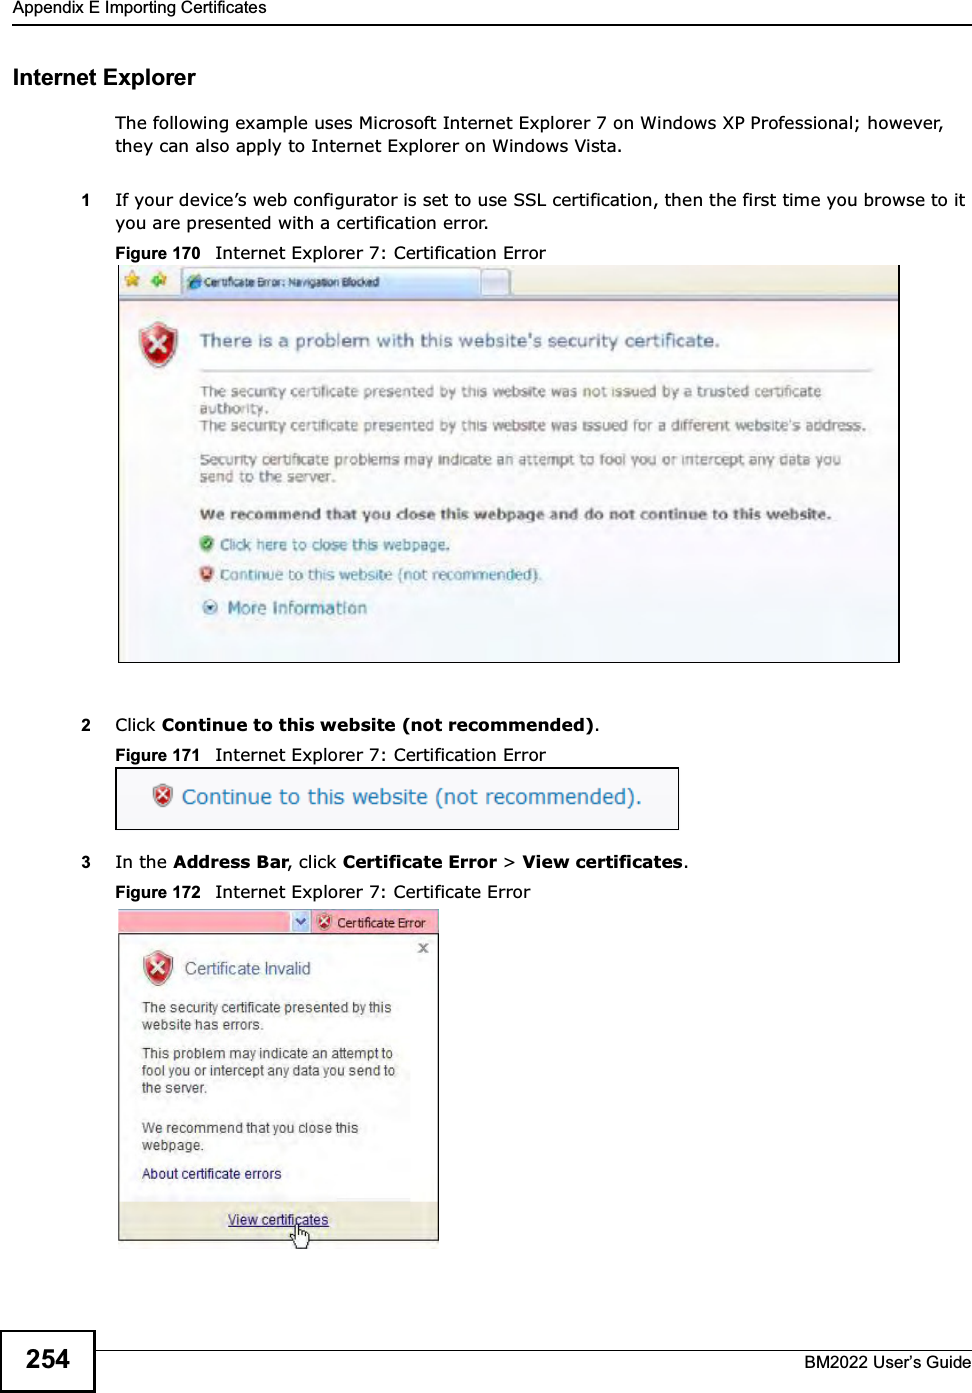 Appendix E Importing CertificatesBM2022 Users Guide254Internet ExplorerThe following example uses Microsoft Internet Explorer 7 on Windows XP Professional; however, they can also apply to Internet Explorer on Windows Vista.1If your devices web configurator is set to use SSL certification, then the first time you browse to it you are presented with a certification error.Figure 170   Internet Explorer 7: Certification Error2Click Continue to this website (not recommended).Figure 171   Internet Explorer 7: Certification Error3In the Address Bar, click Certificate Error &gt; View certificates.Figure 172   Internet Explorer 7: Certificate Error